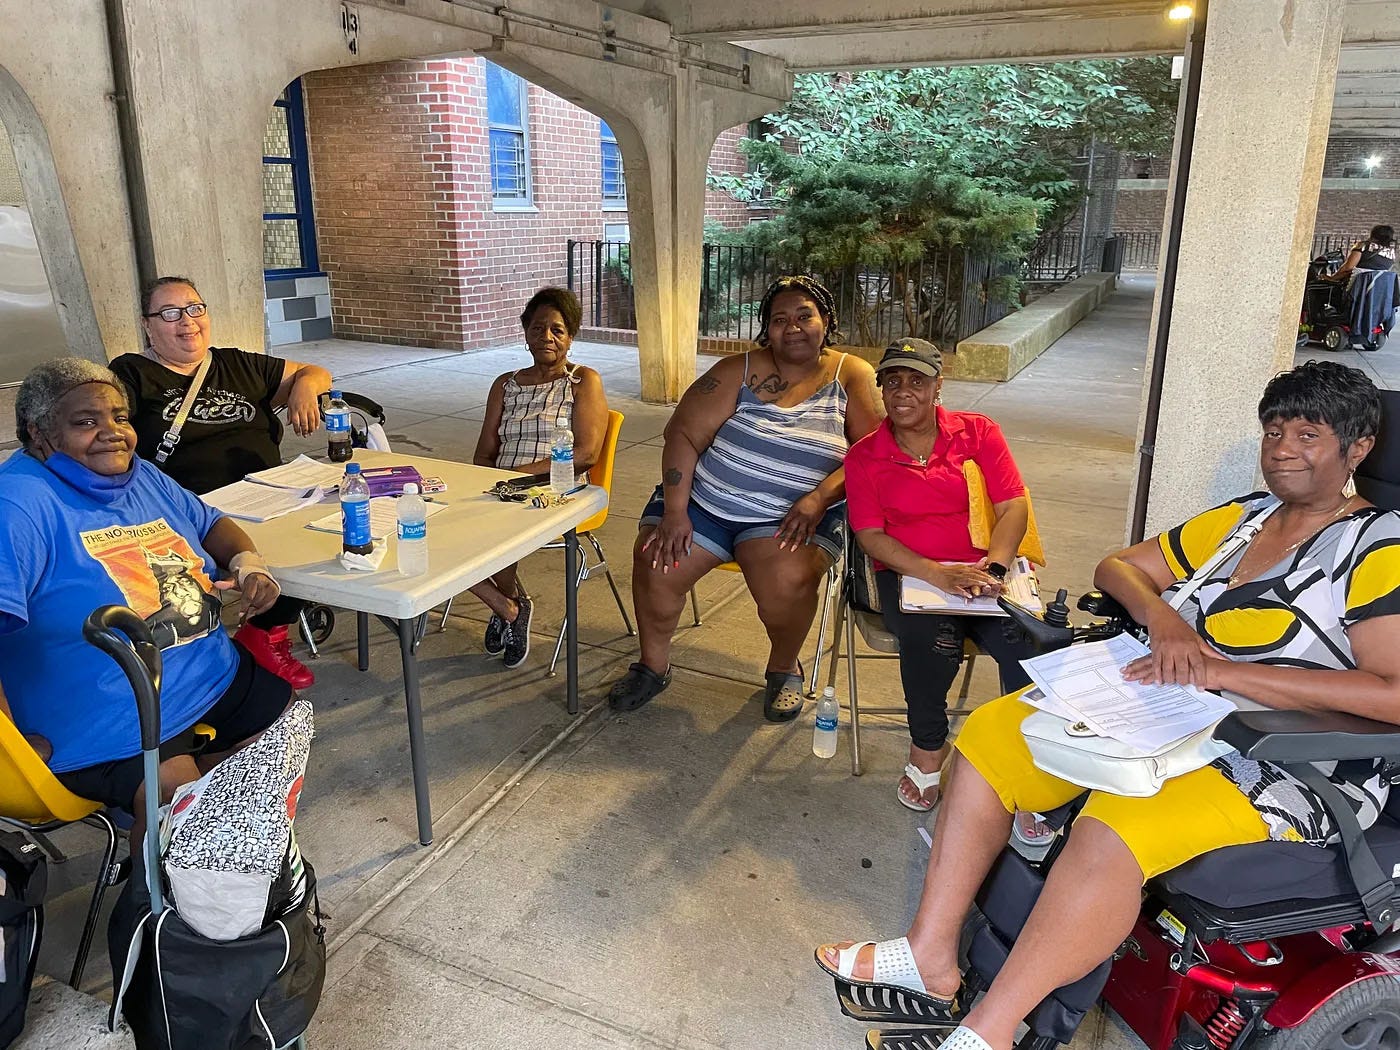 Six Black women sit around a card table under a concrete portico, with a brick building and foliage behind them.